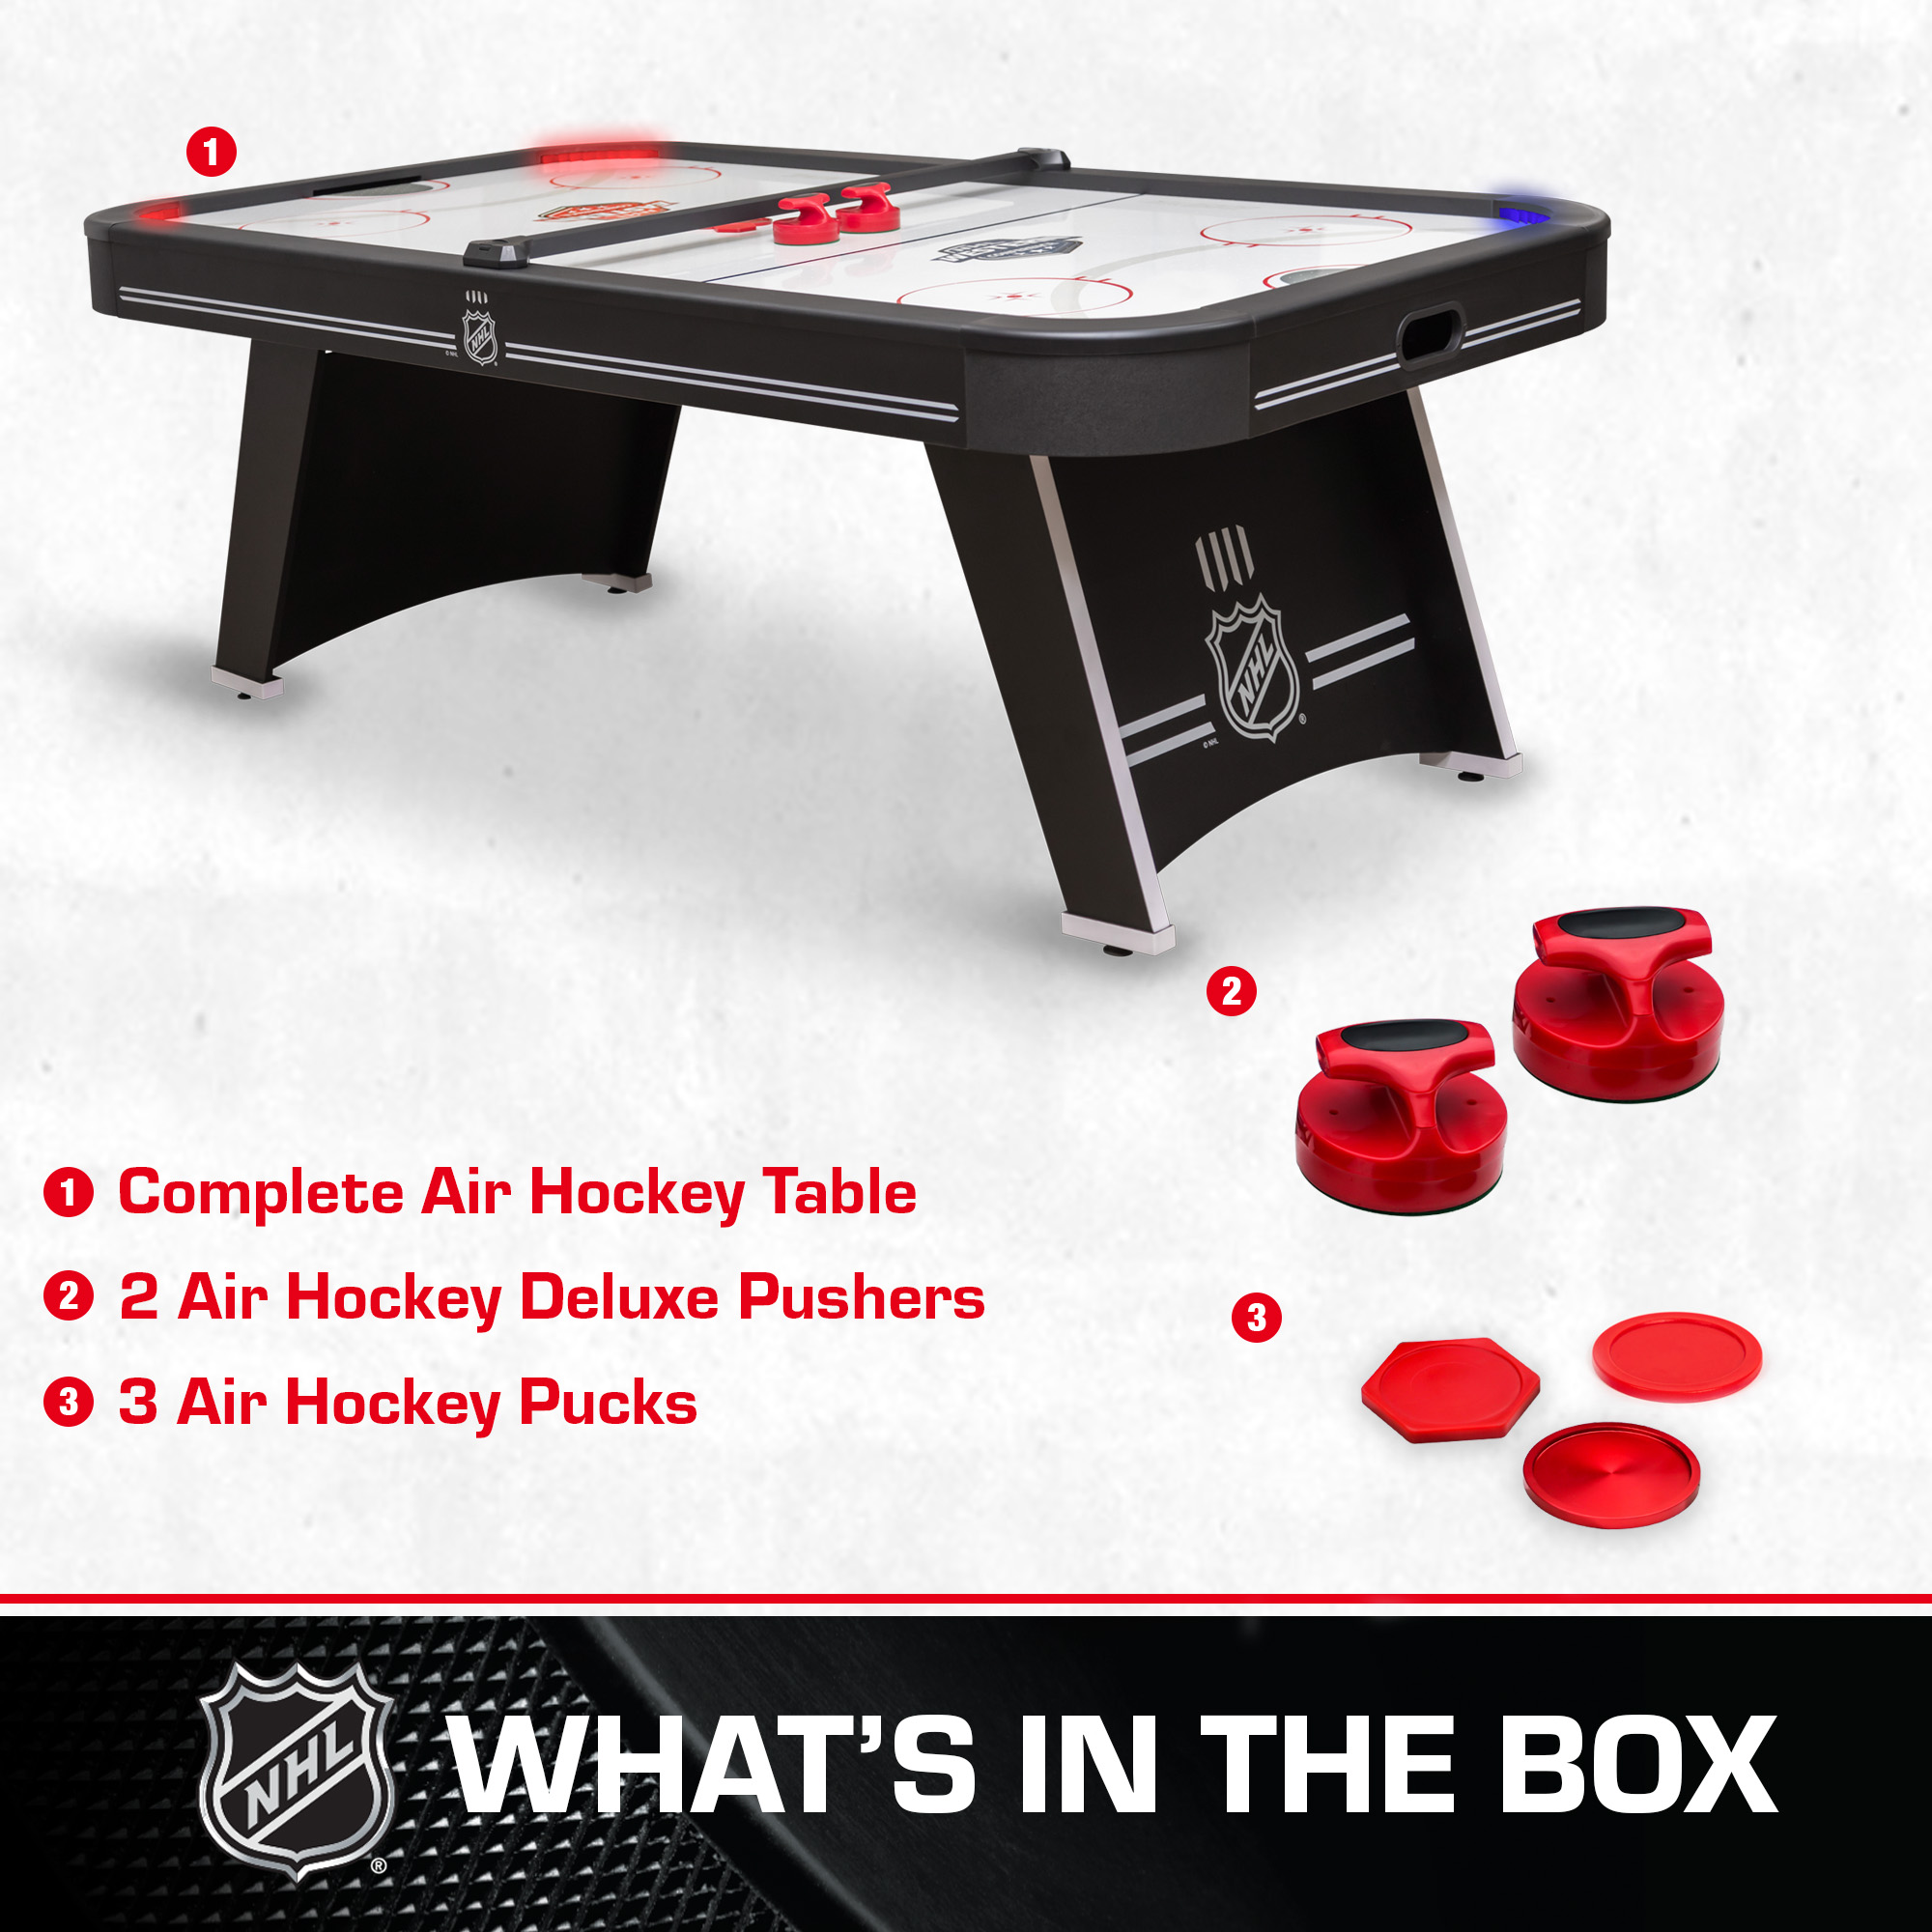 NHL Power Play Pro 84" Indoor Air Hockey Table with Overhead Projection LED Scoring and Light-Up Power Corners - image 2 of 8